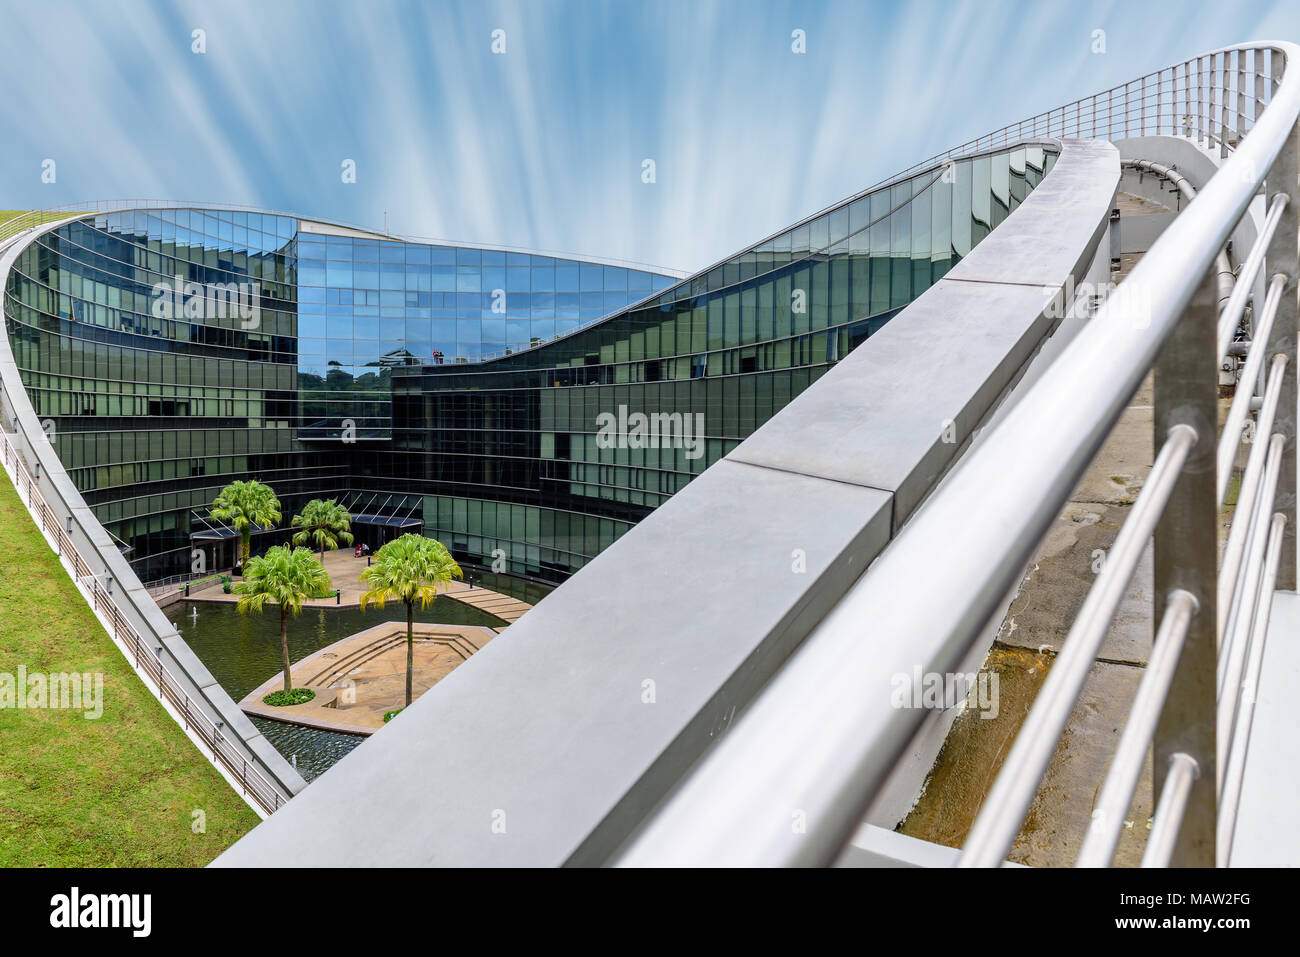 SINGAPORE - October 24, 2016: Modern architectural building of Nanyang Technological University in Singapore. Citylandscape Nanyang Technological Univ Stock Photo